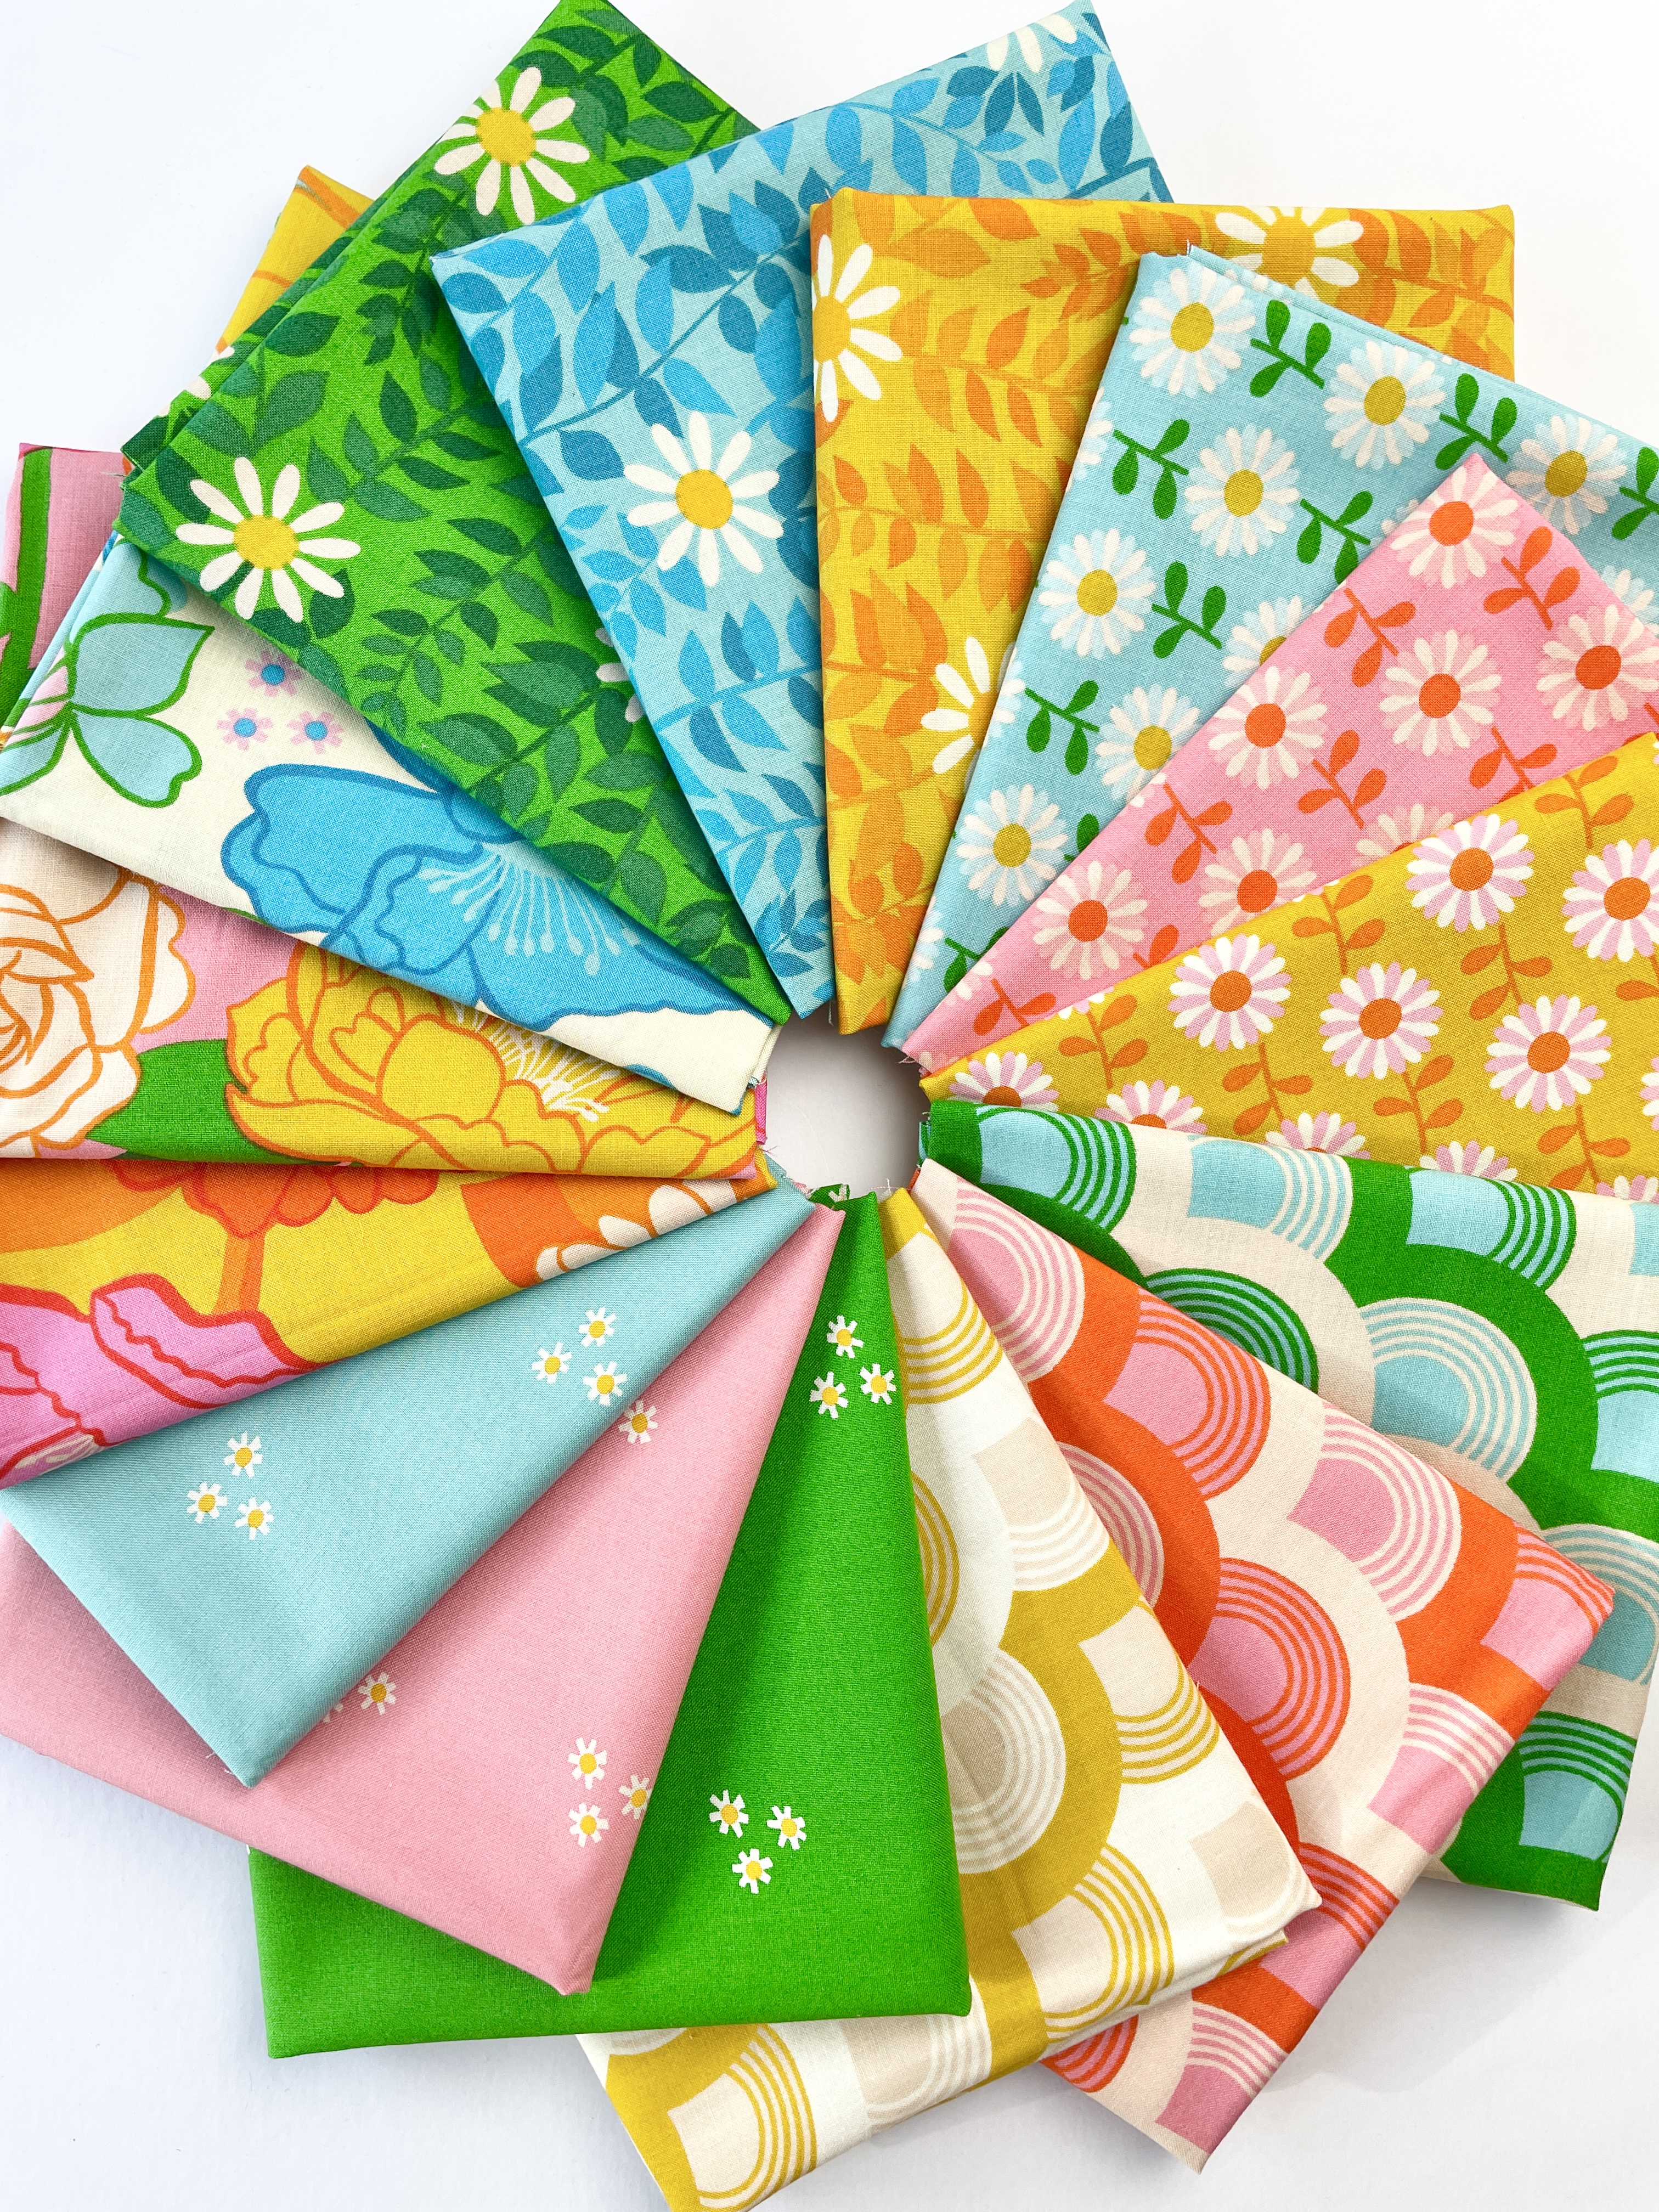 Modern patchwork and quilting fabric from the Flowerland collection designed by Melody Miller for Ruby Star Society